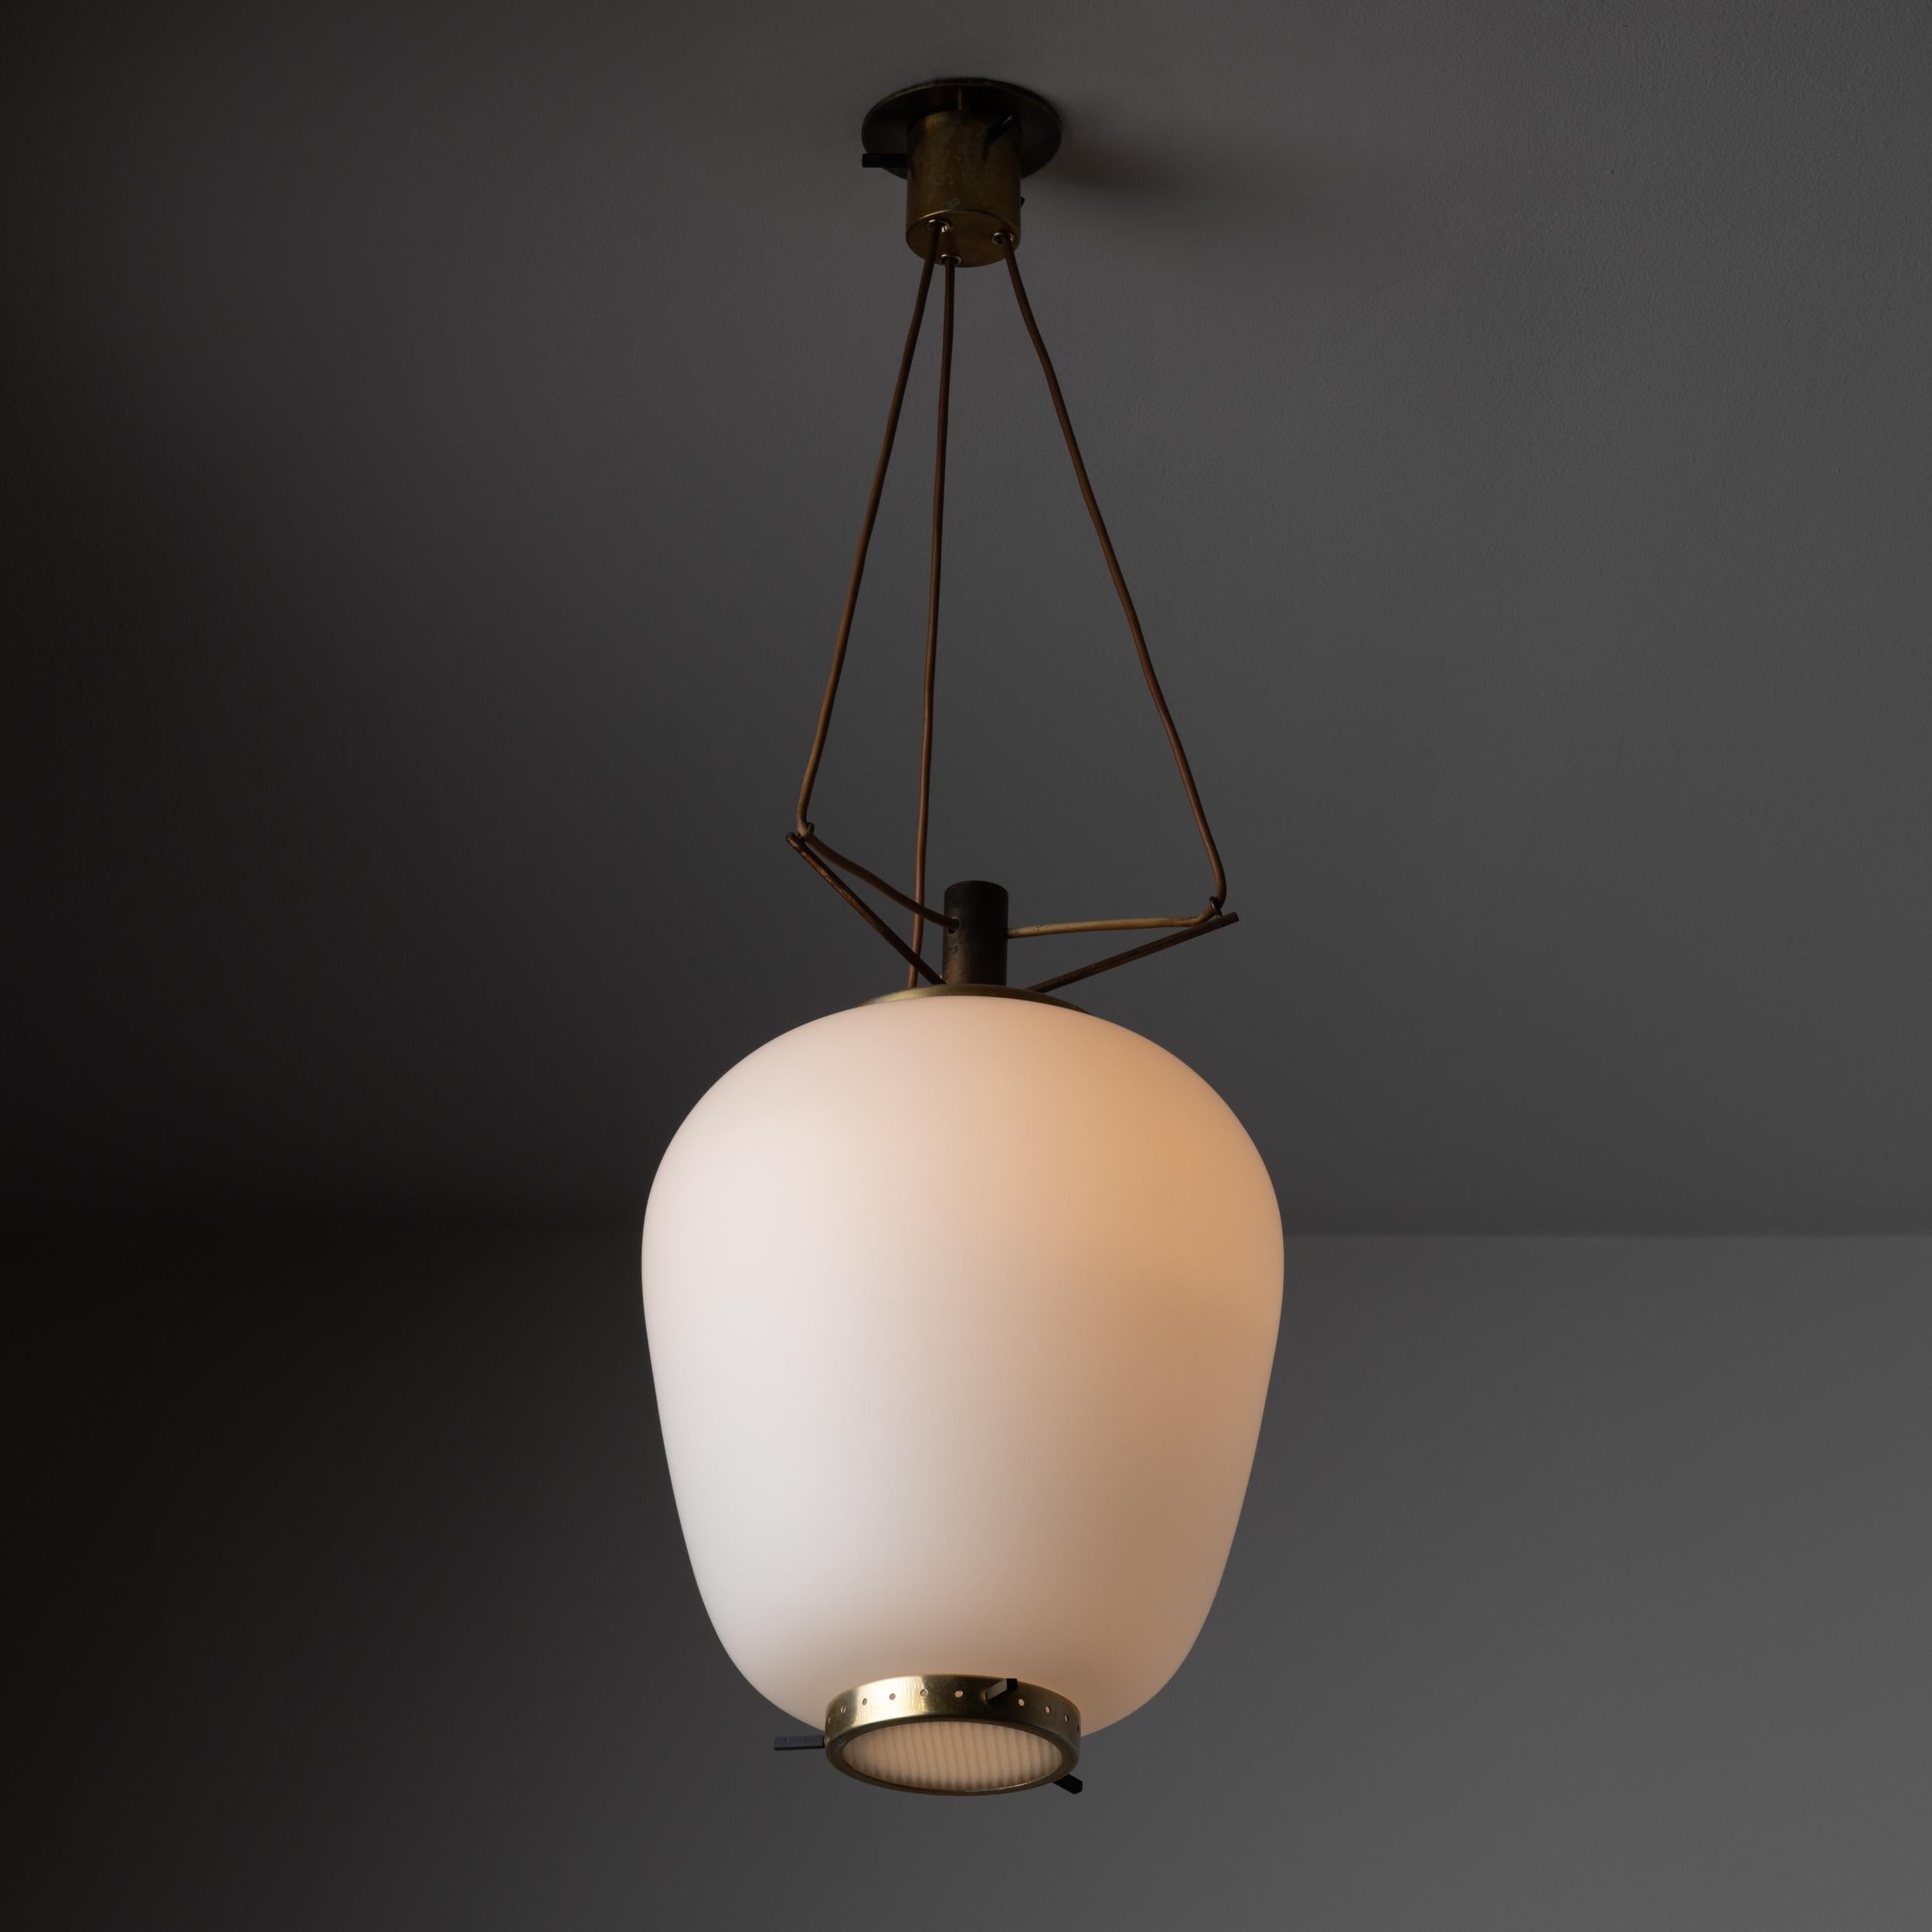 Suspension Light by Stilnovo. Manufactured in Italy, circa the 1950s. Features a large frosted glass shade paired with a reeded glass bottom diffuser cap. Polished brass and painted black hardware. Rewired for U.S. standards. Original canopy, custom